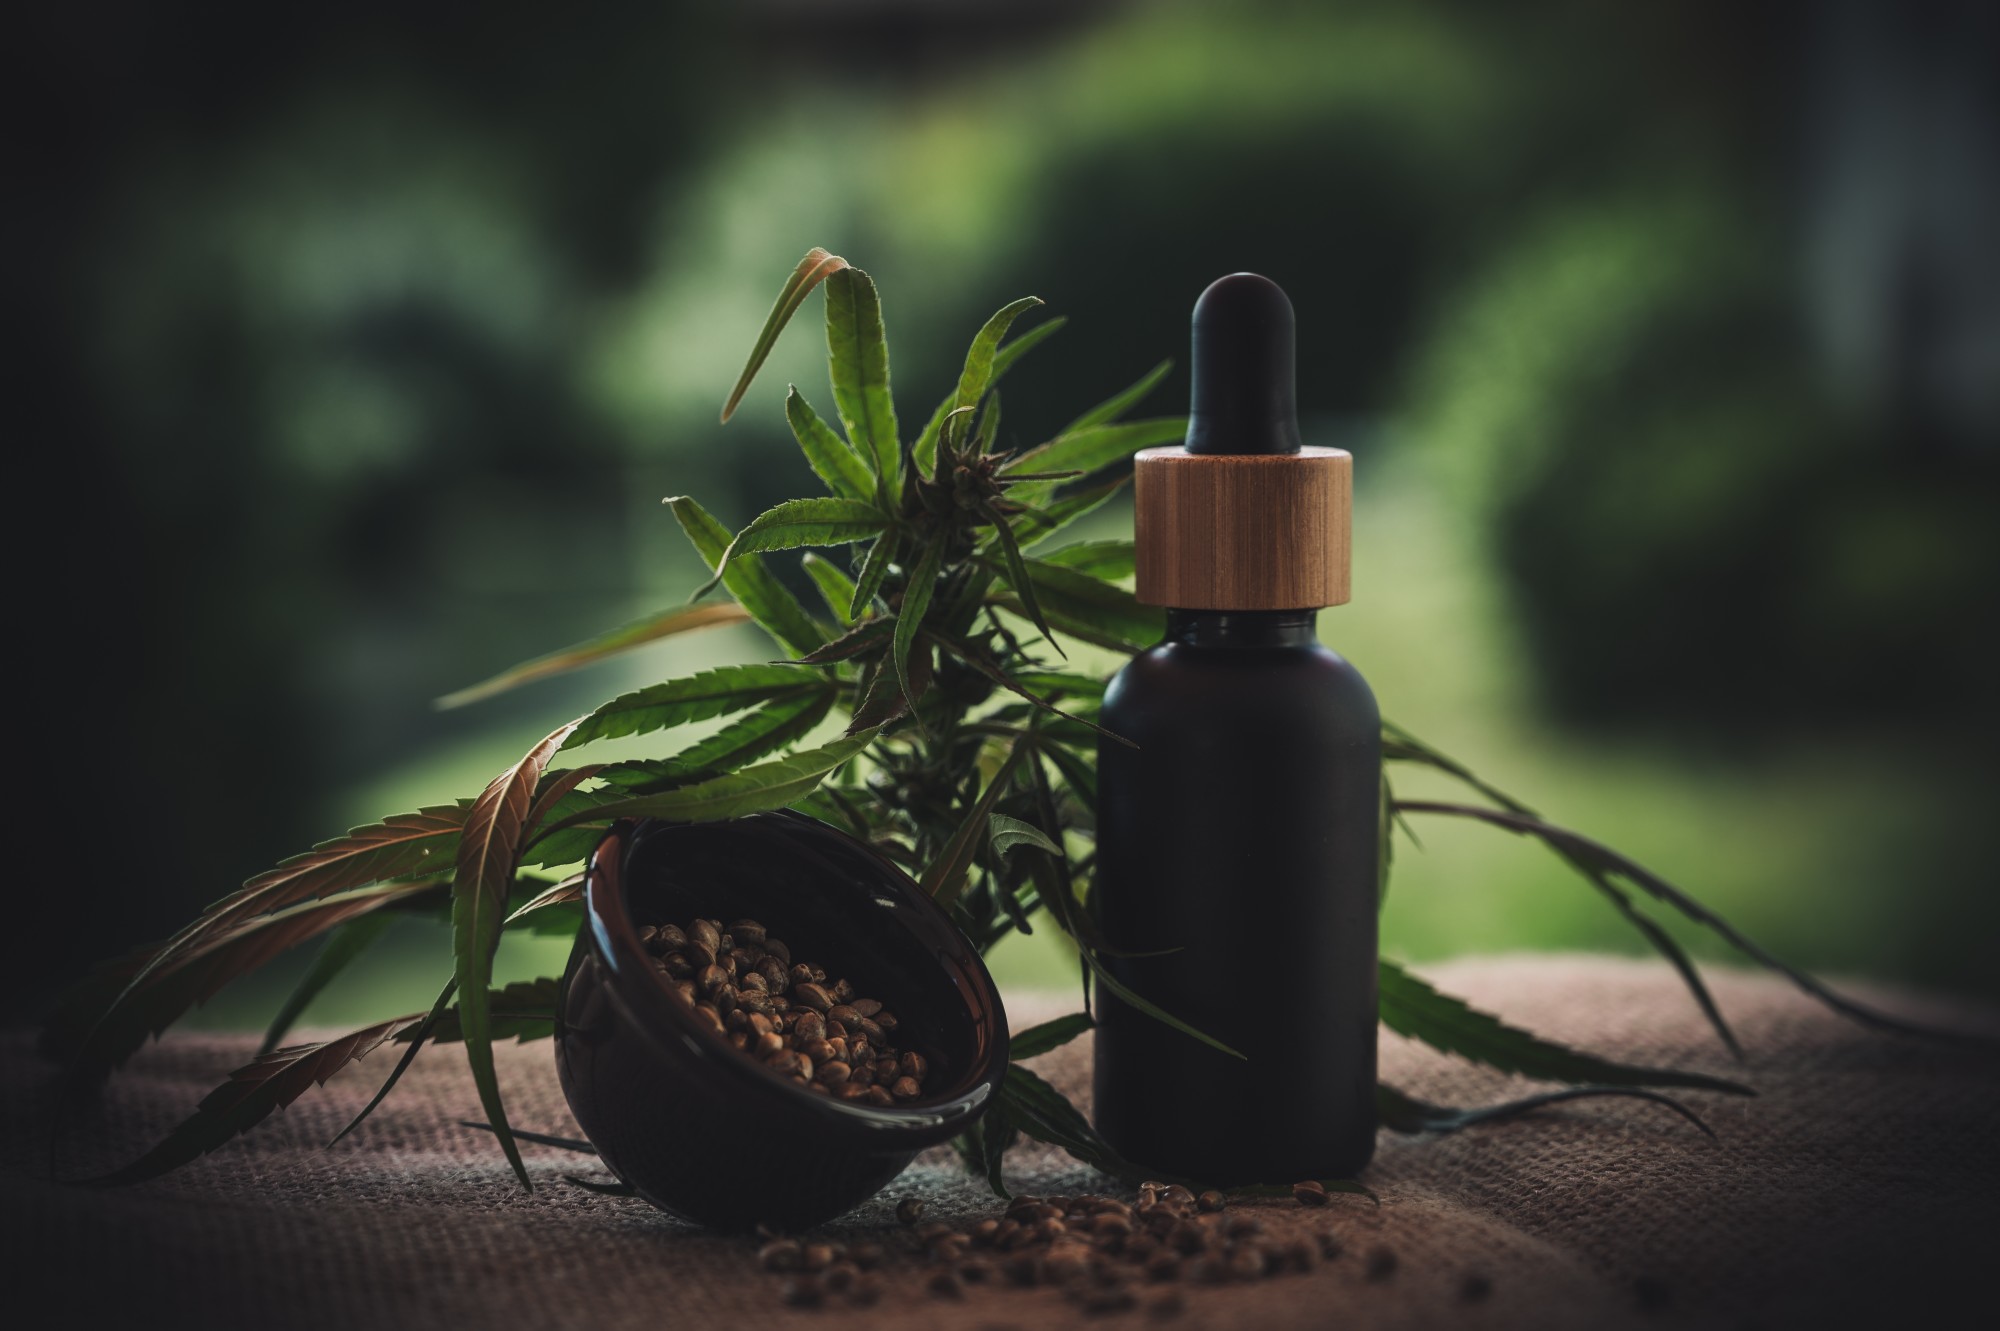 More and more people are starting to experience the benefits of CBD. If you want to join in on the fun, these are the different types of CBD to try.